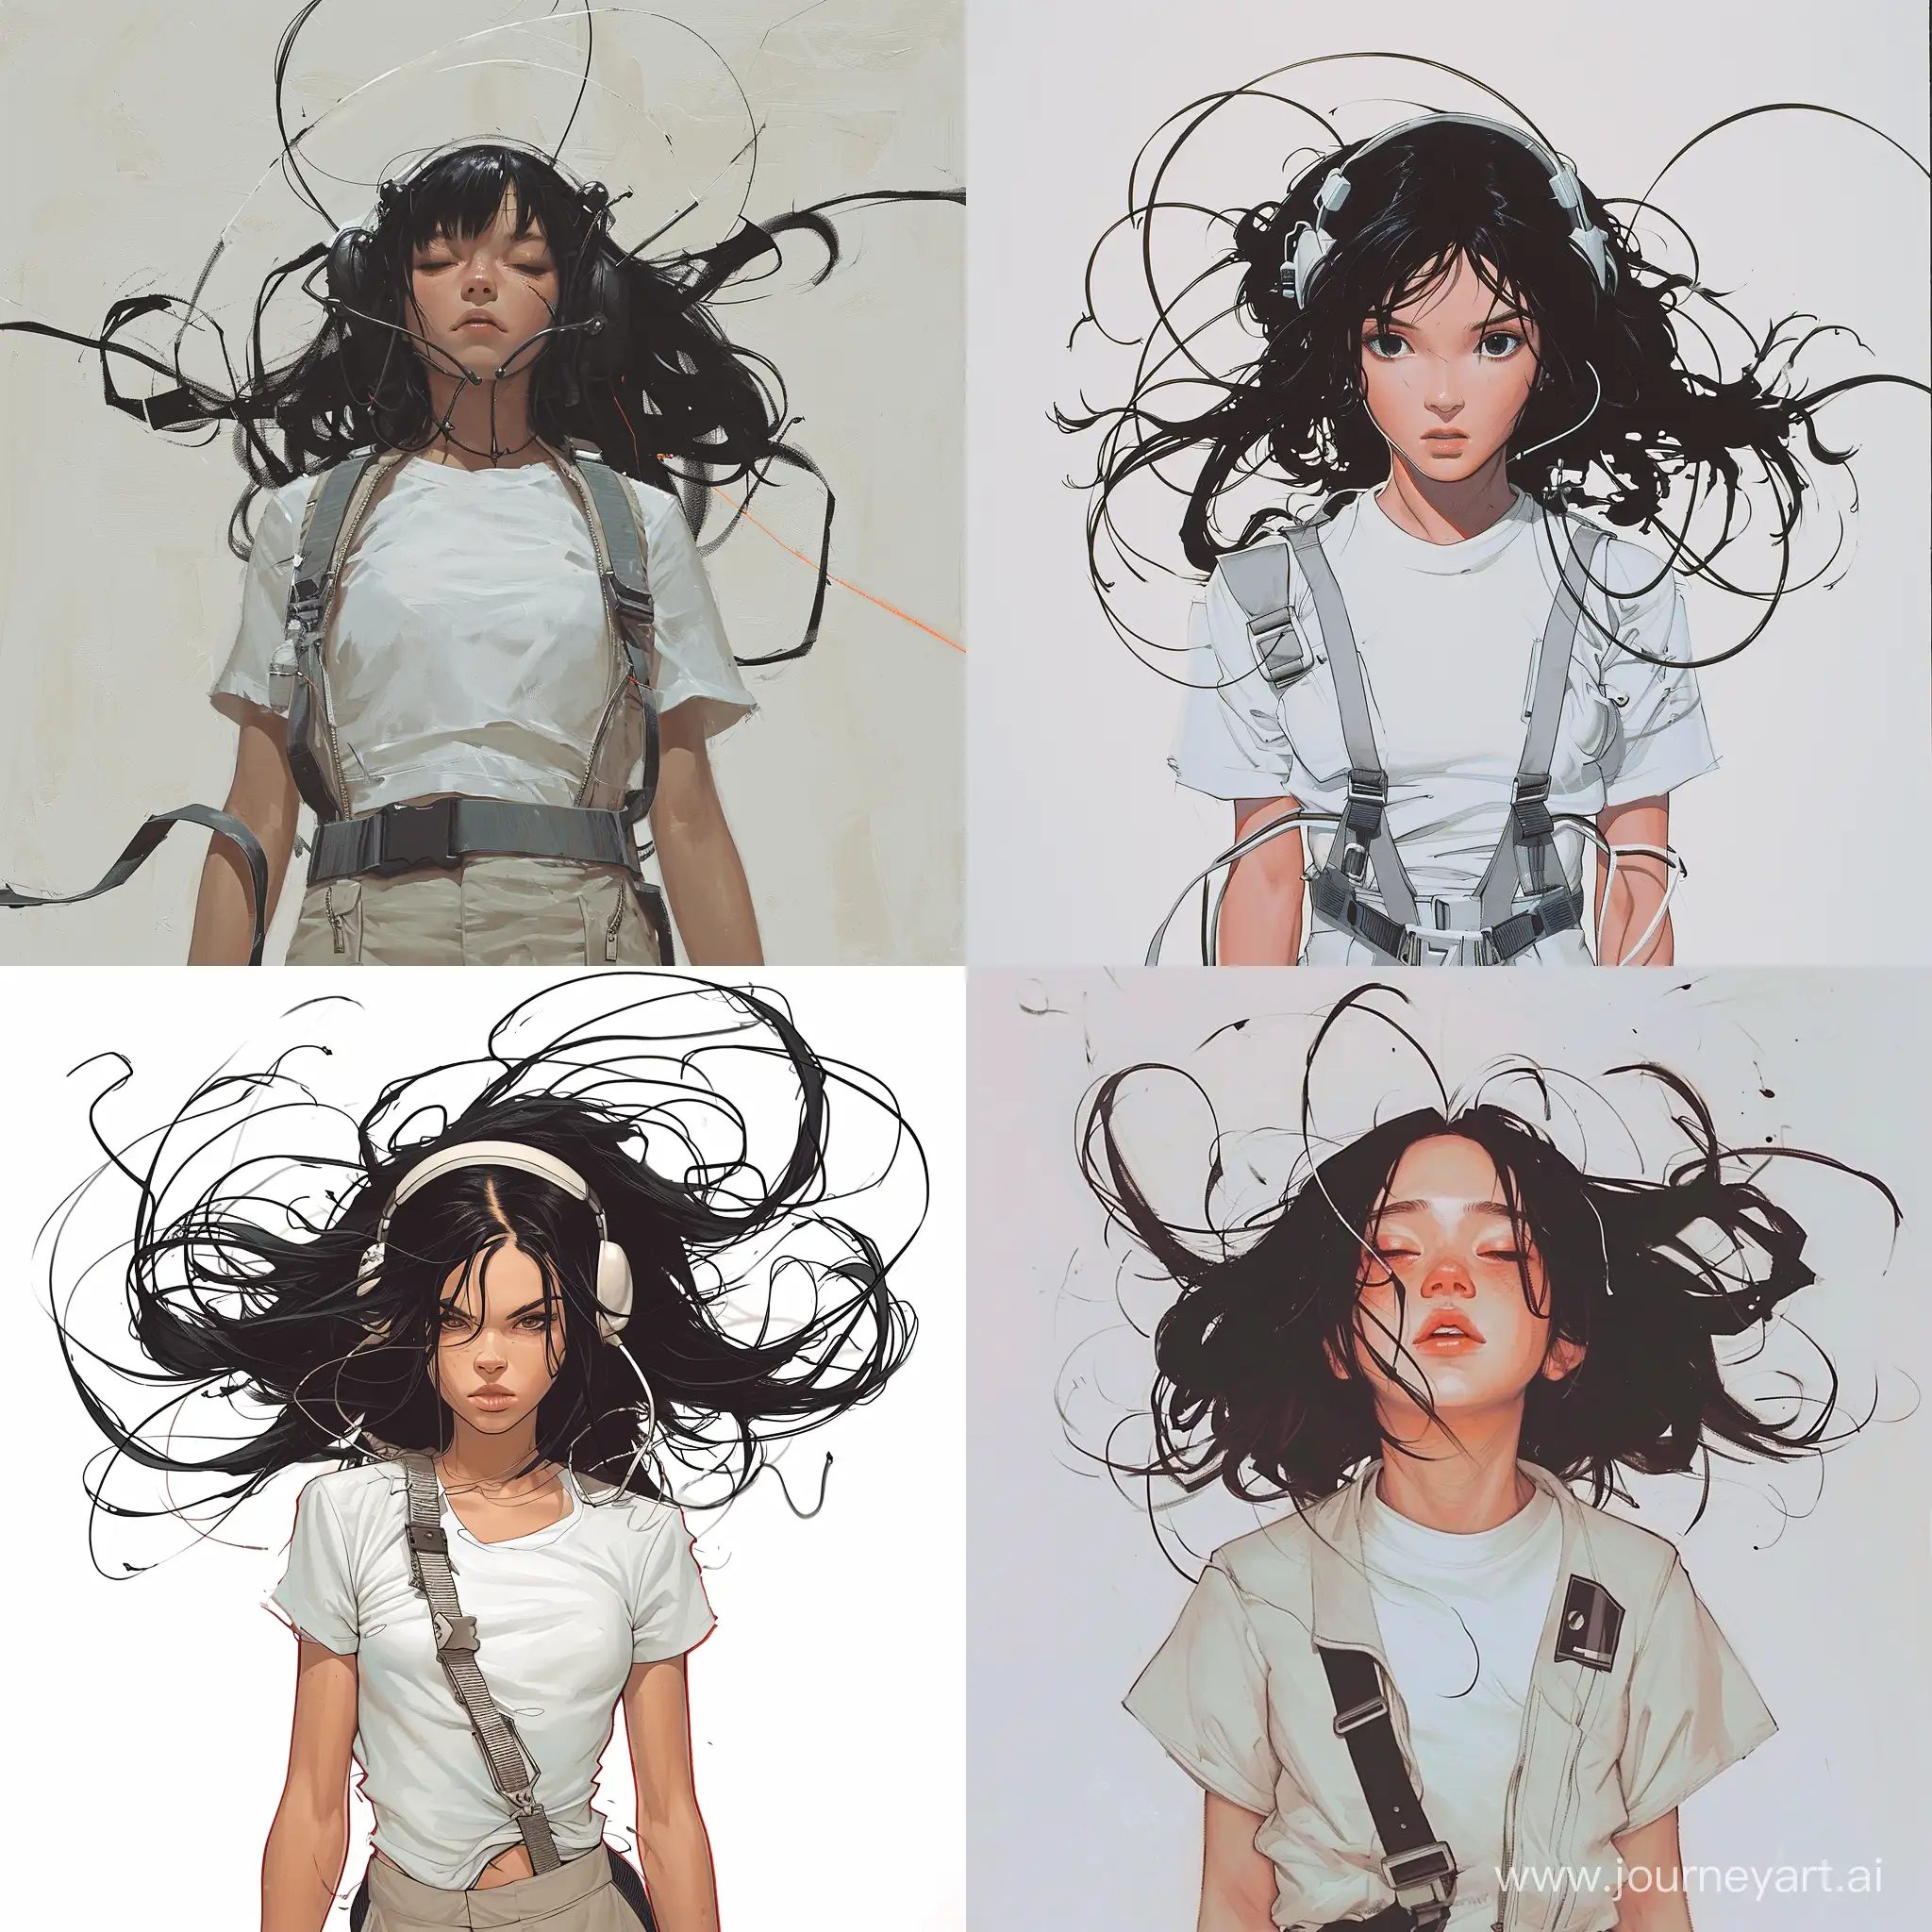 70s dark fantasy art, illustration of the young nice looking woman with black hair. A few strands of hair are released, the rest are collected at the back of the head. She is wearing white T-shirt and pilot suit, which upper part is tied over her thin waist. - ar 9:16